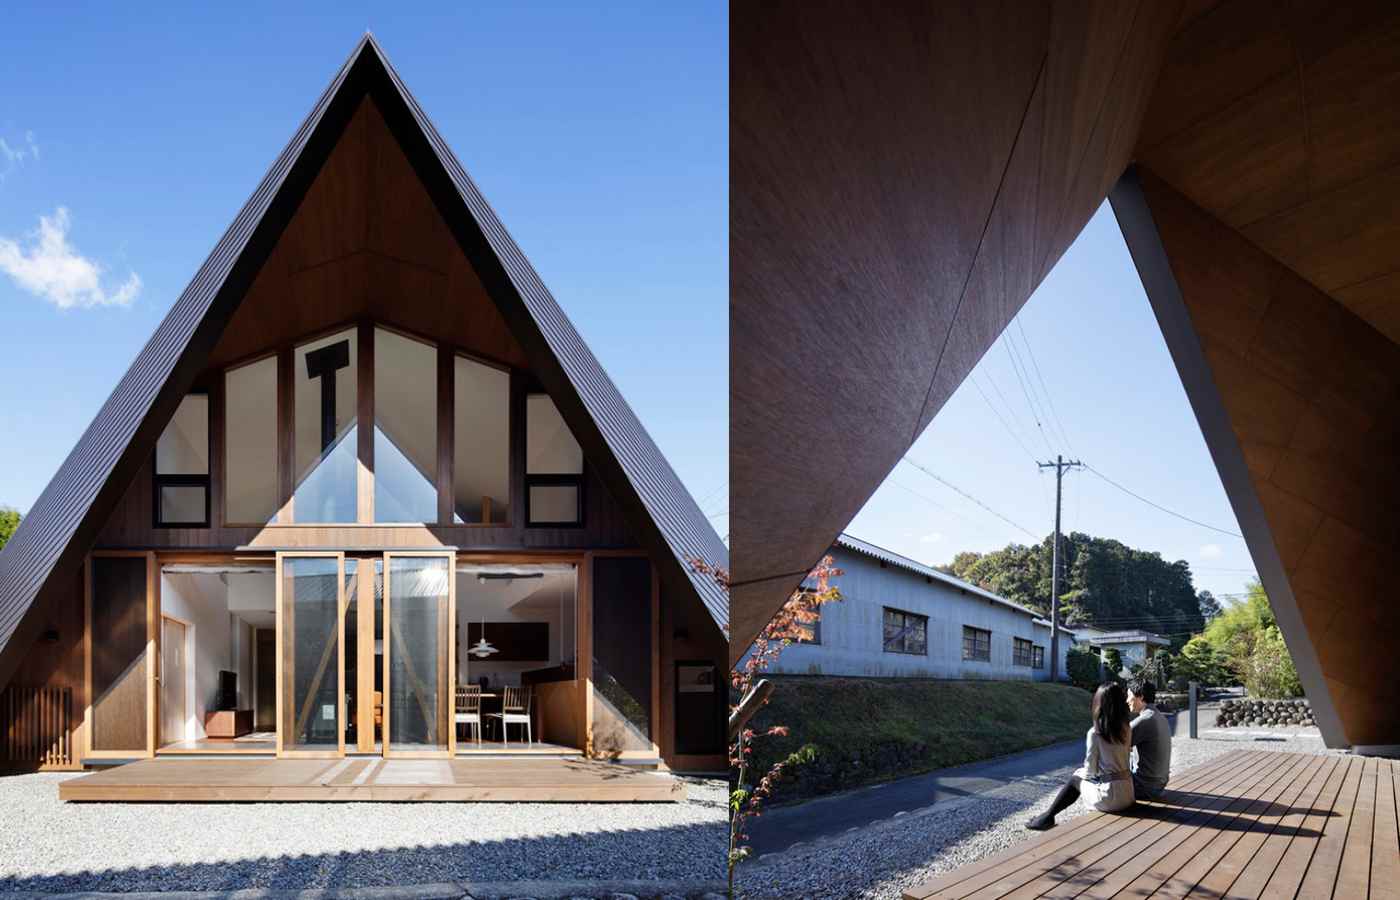 Saddeldach modernly interprets Japanese single-family house with sliding doors and a wooden terrace in front garden